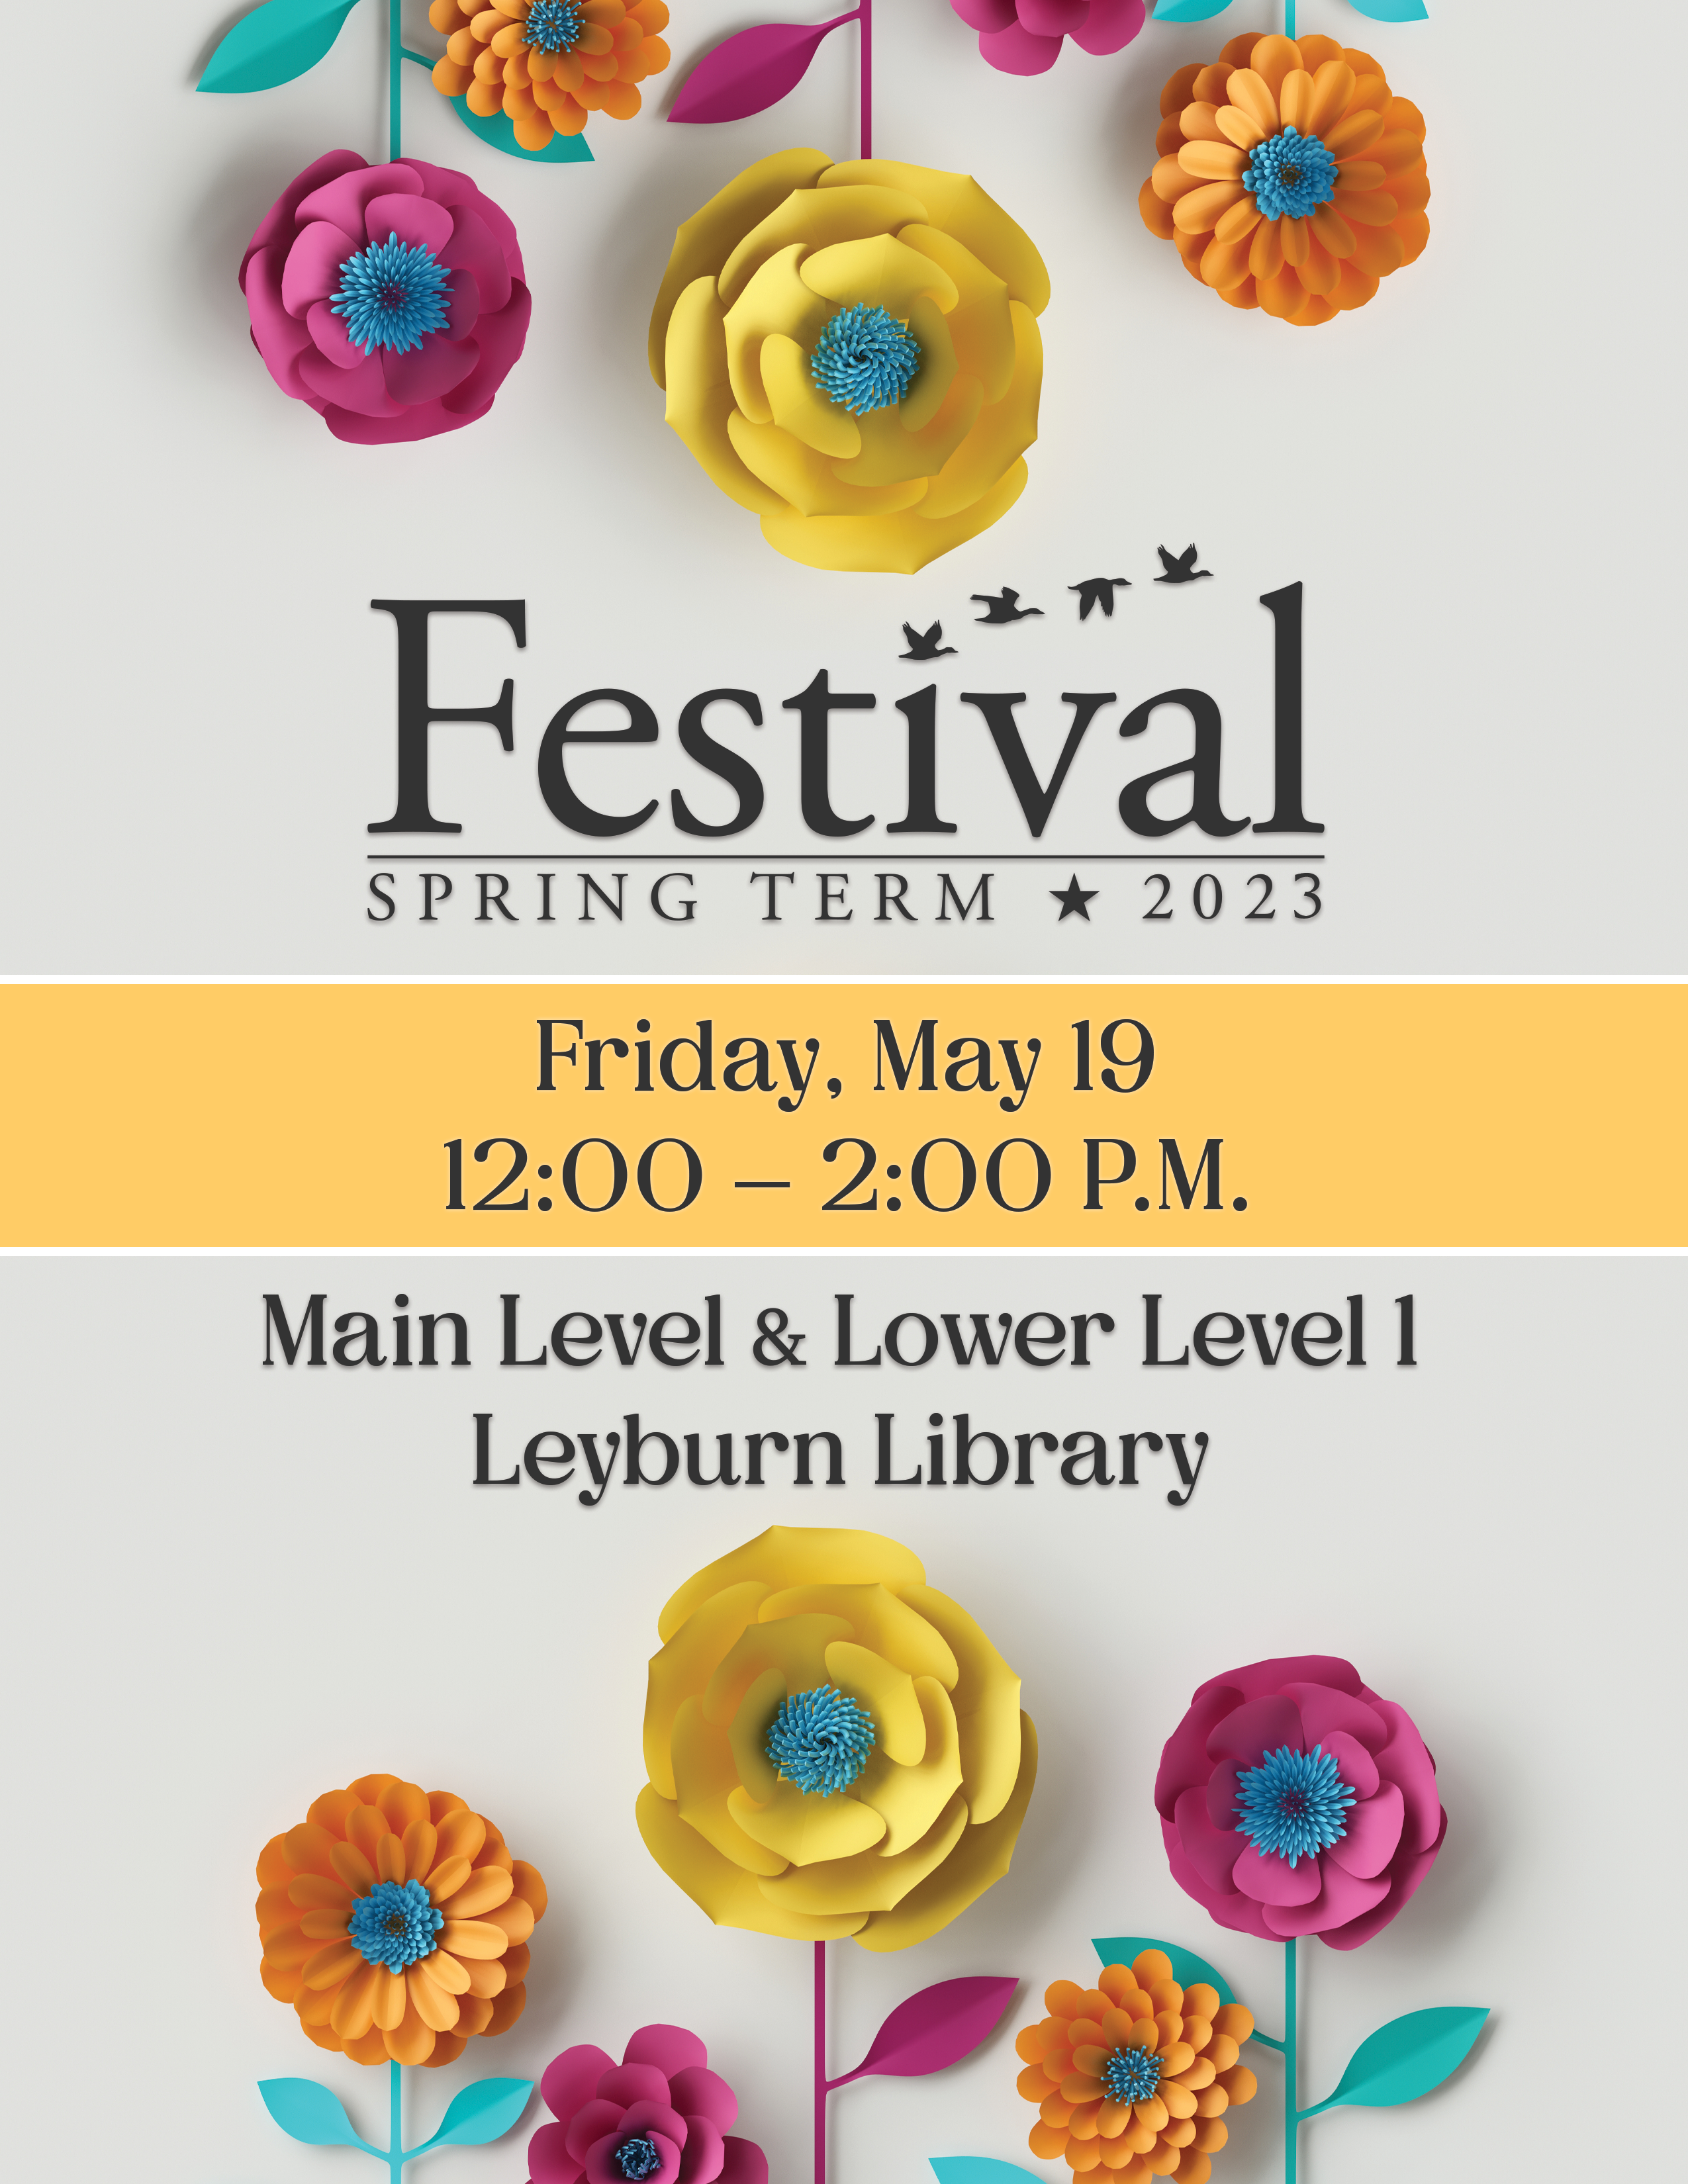 Spring Term Festival 2023. Friday, May 19, 12-2 PM, Main Level and Lower Level 1, Leyburn Library.